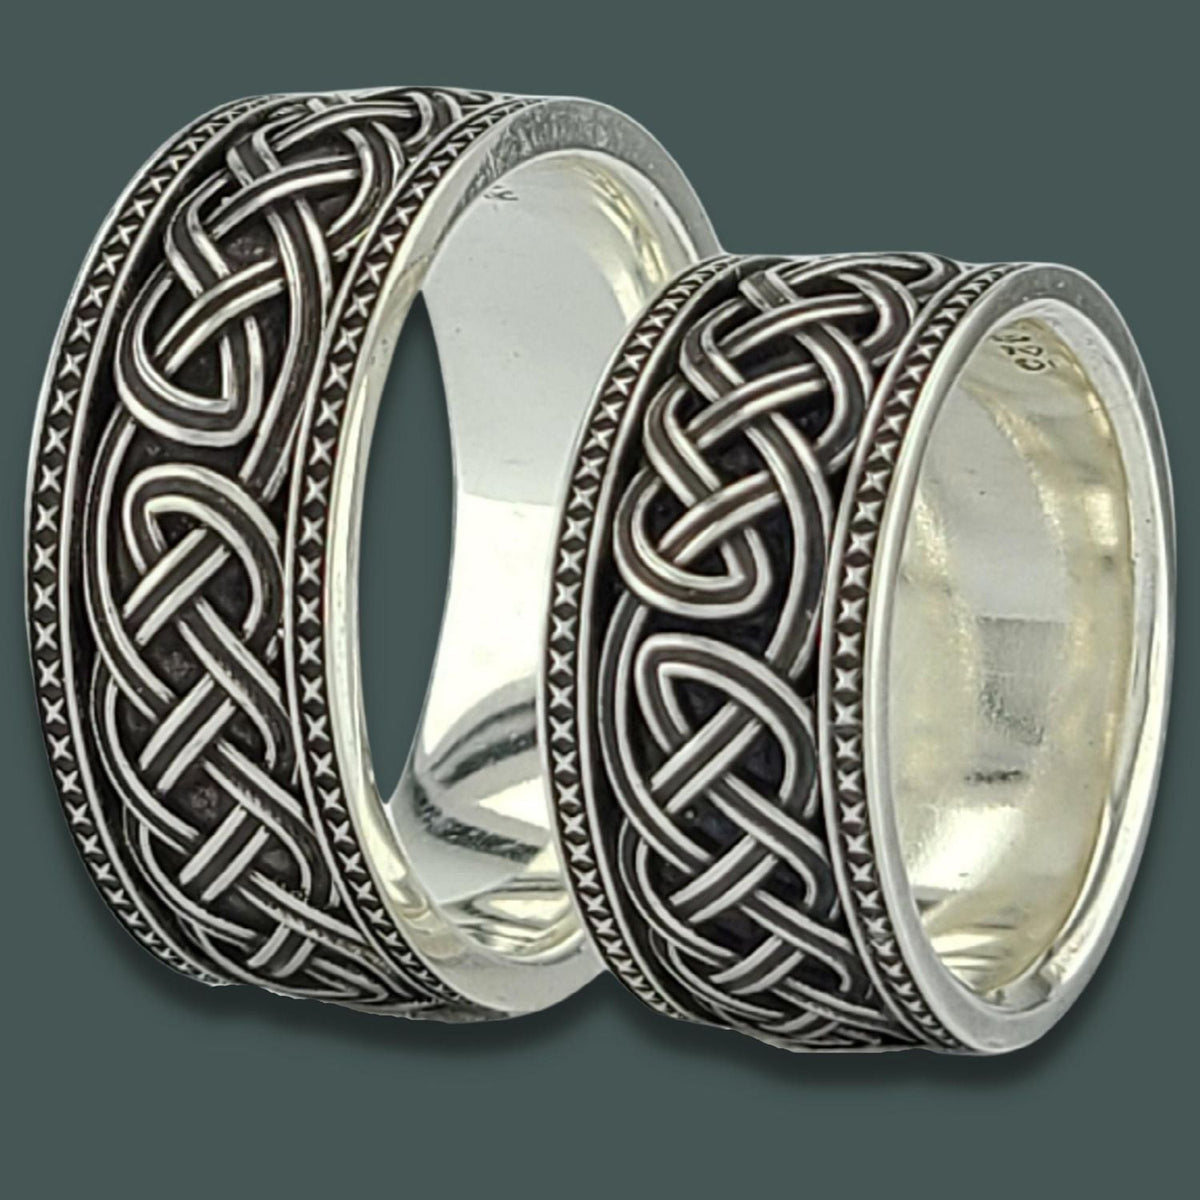 DARK MOON - Starting at $209 - Celtic Jewelscapes